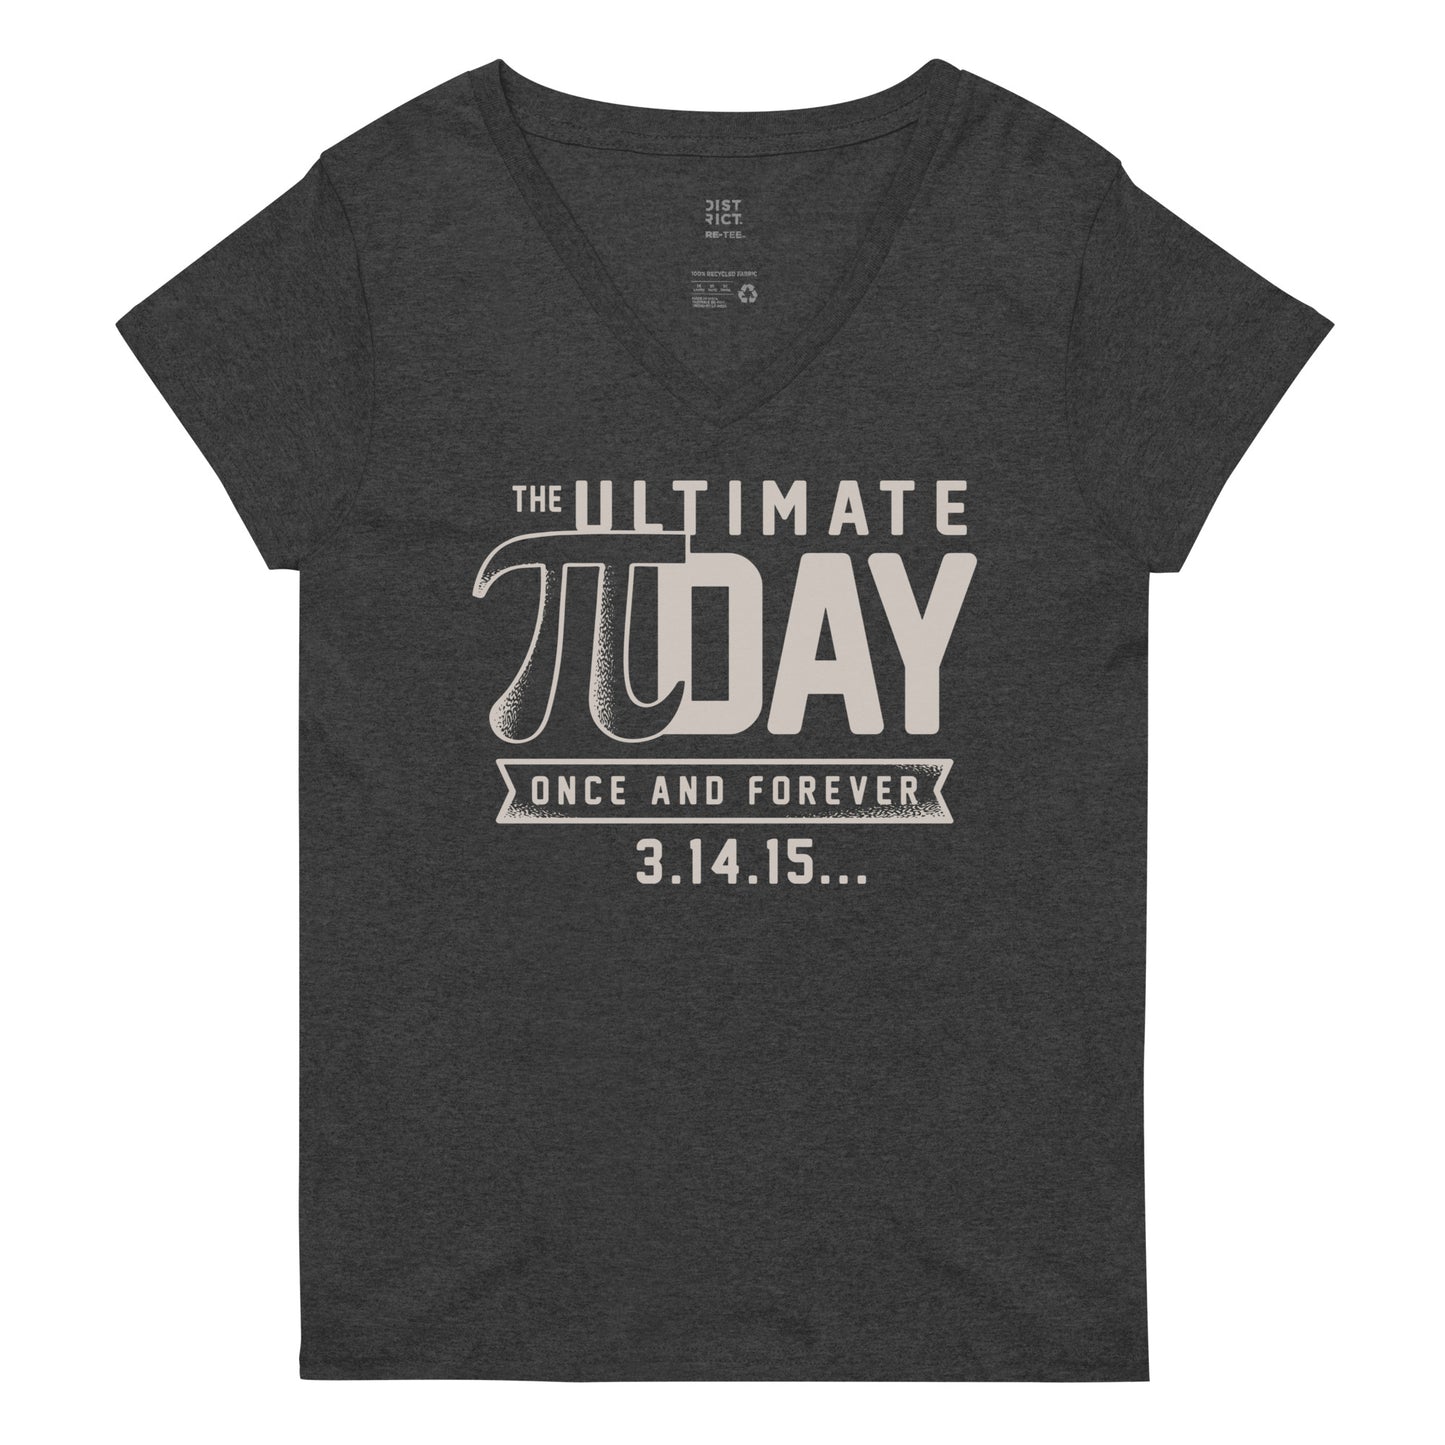 The Ultimate Pi Day Women's V-Neck Tee